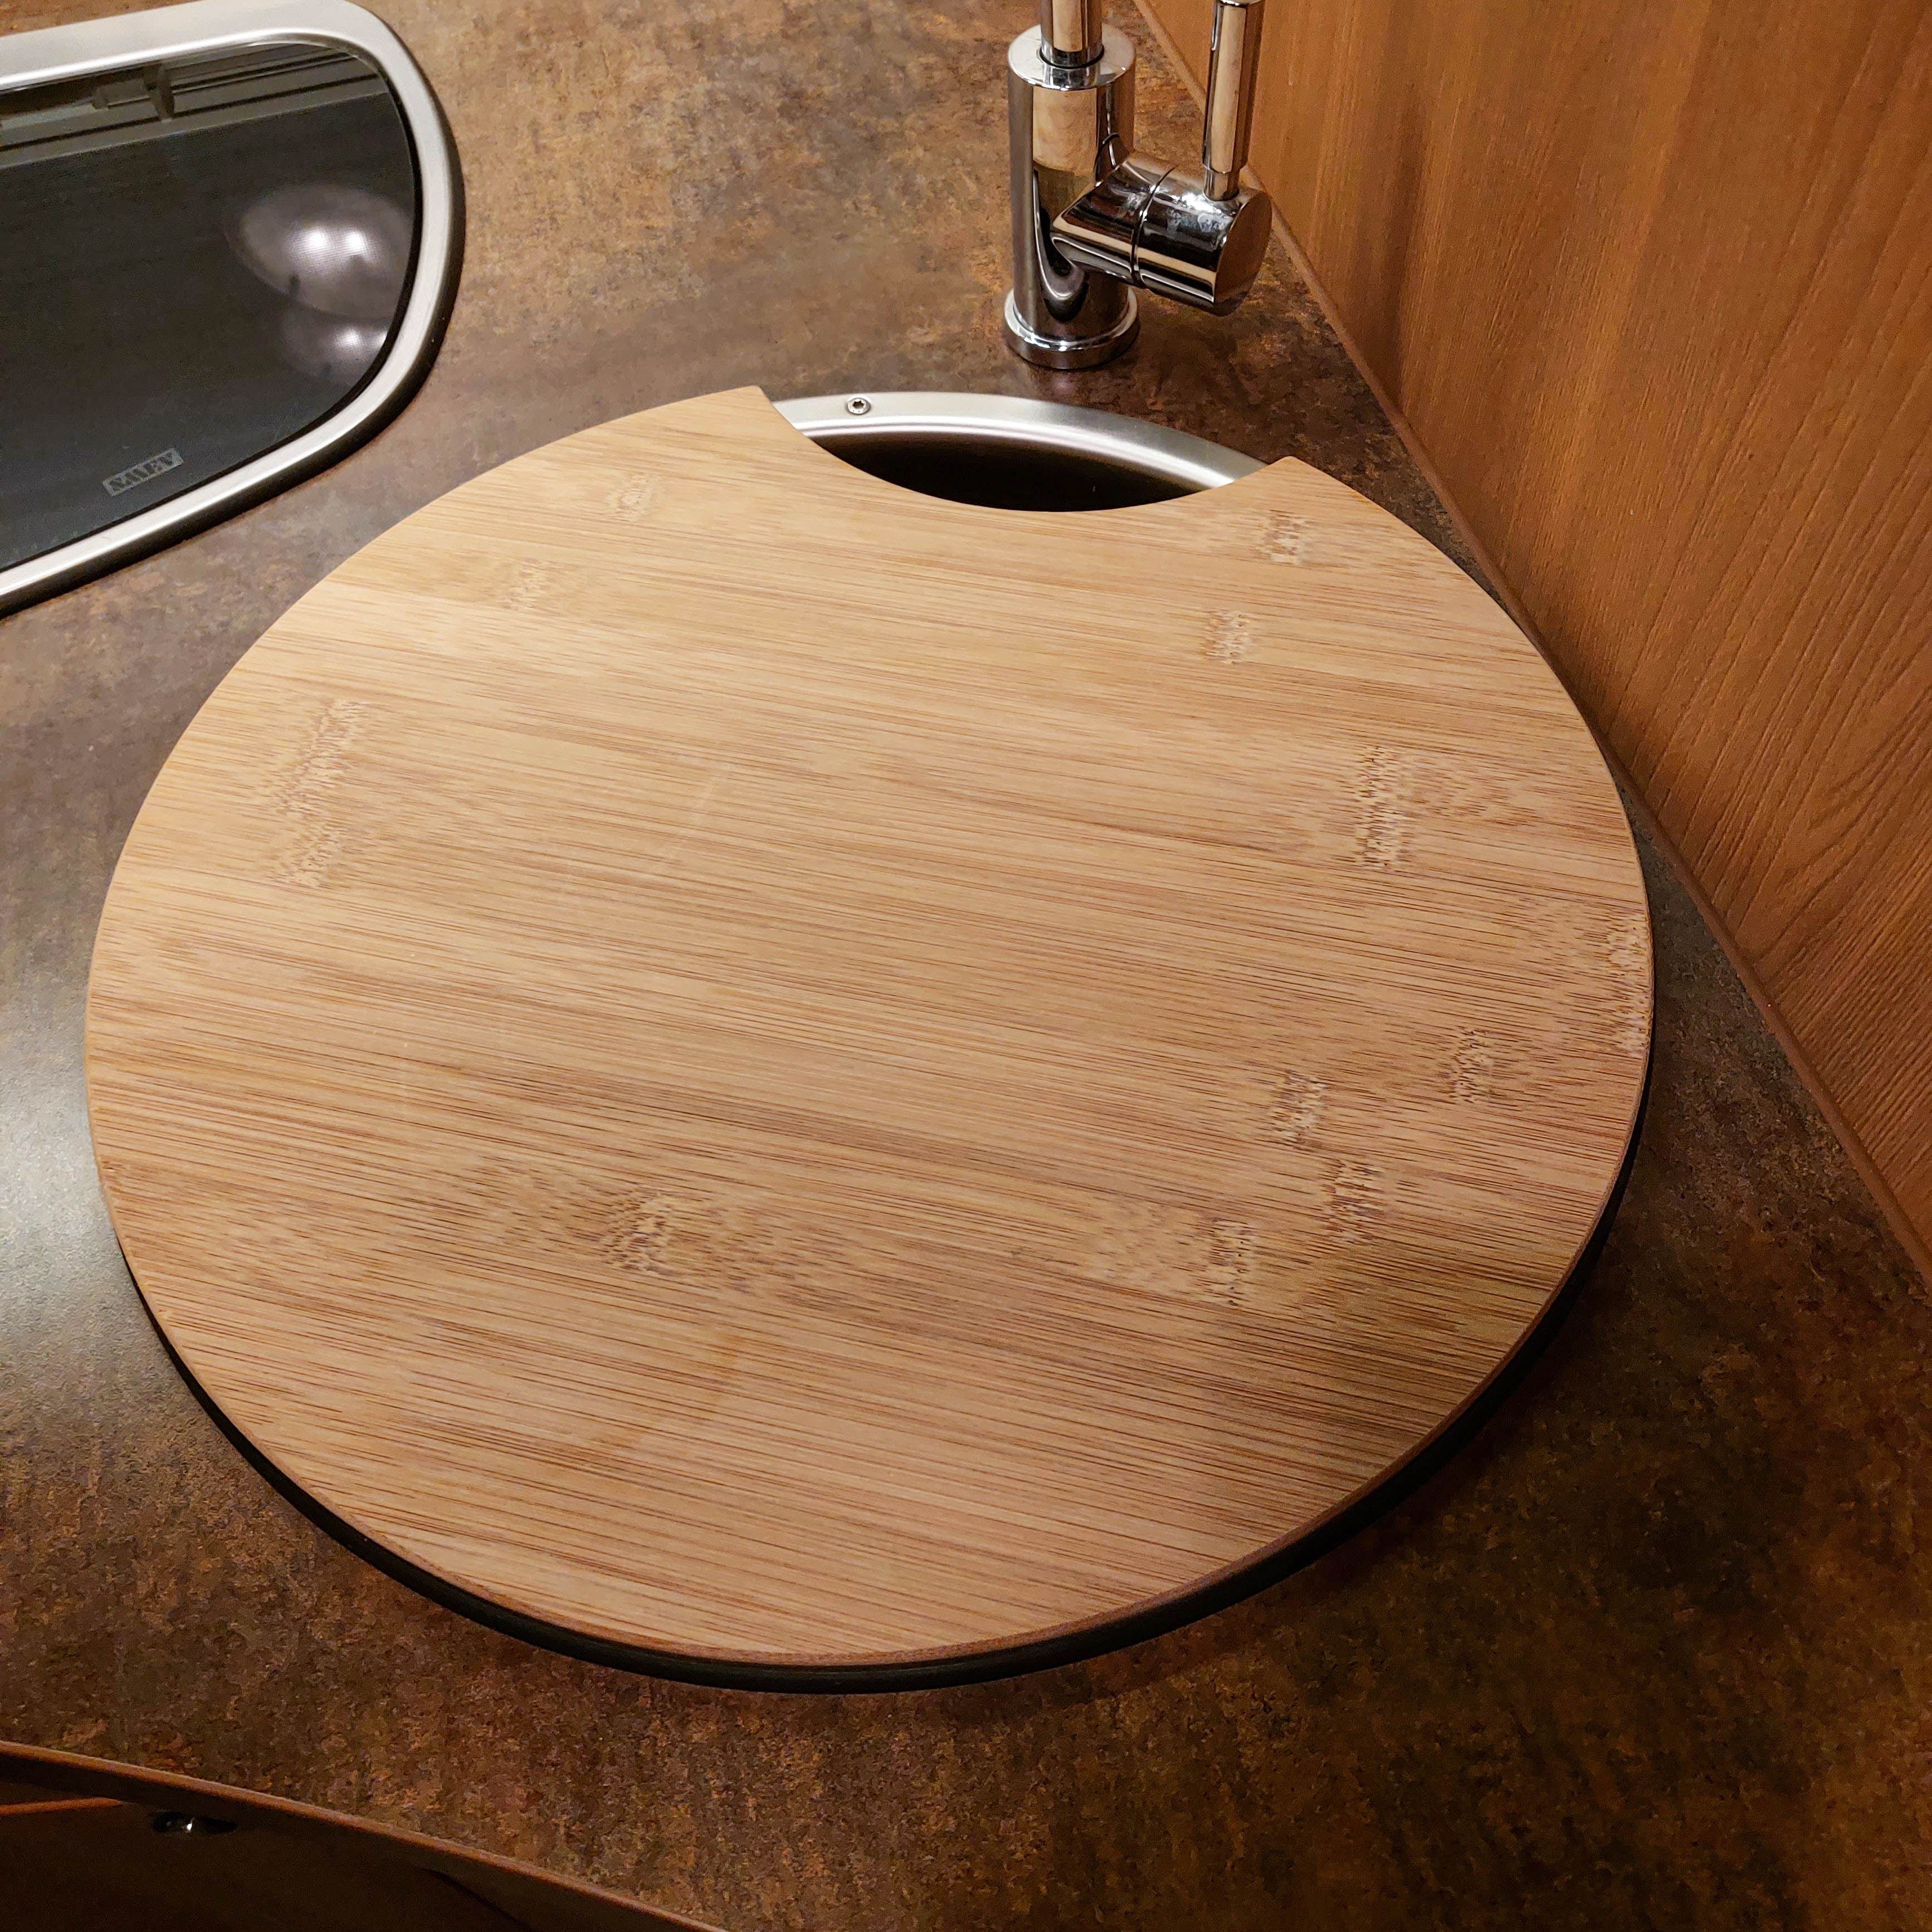 Cutting board with sink cover for Eura Mobil models